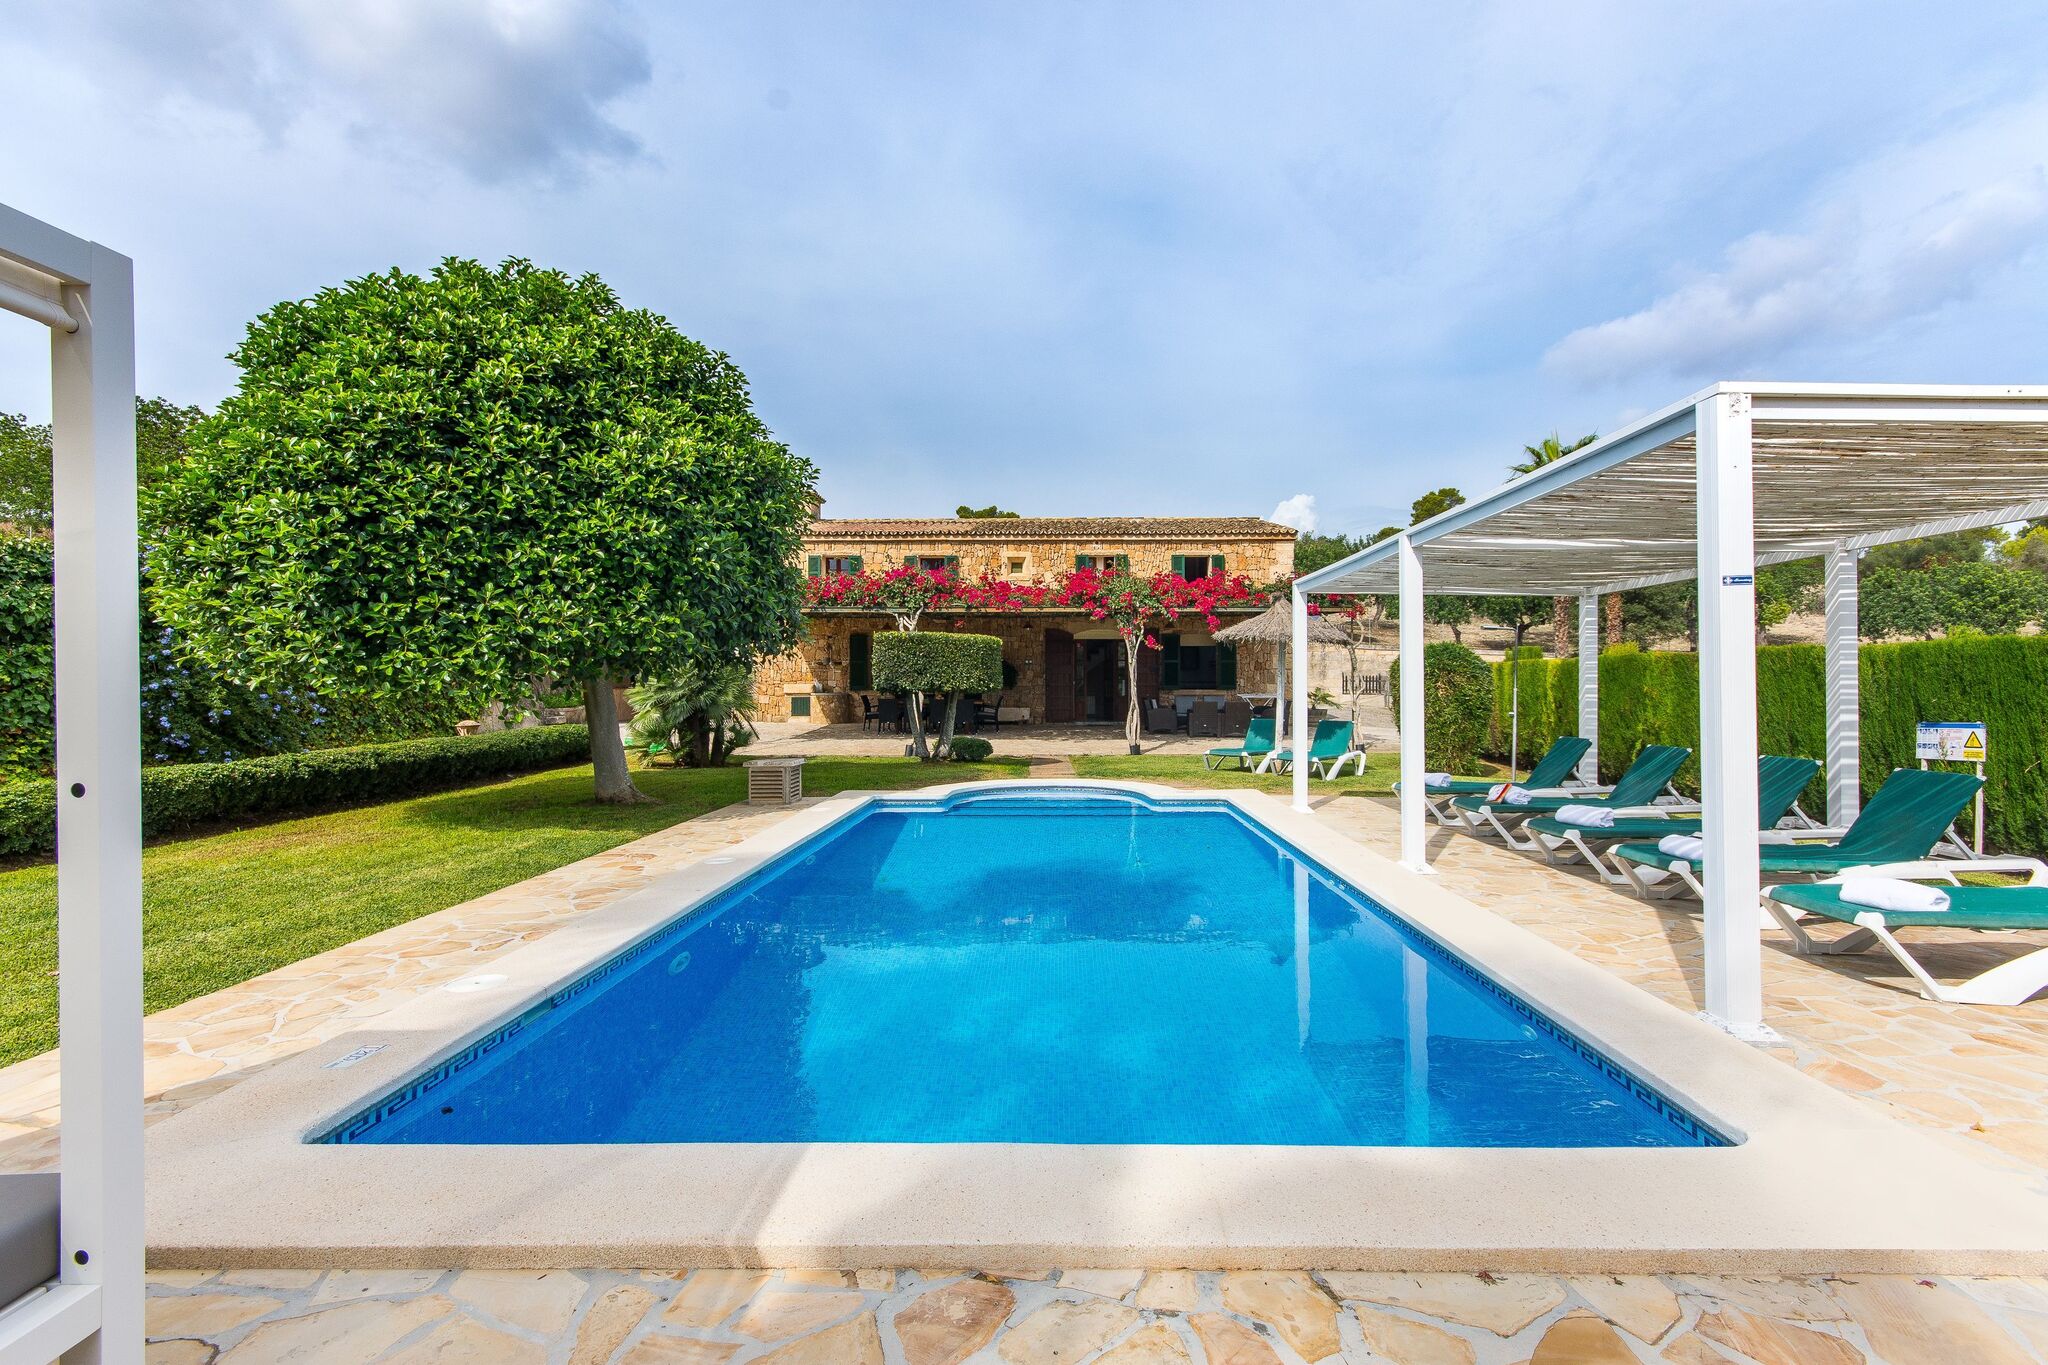 A typical Majorcan country house with private pool